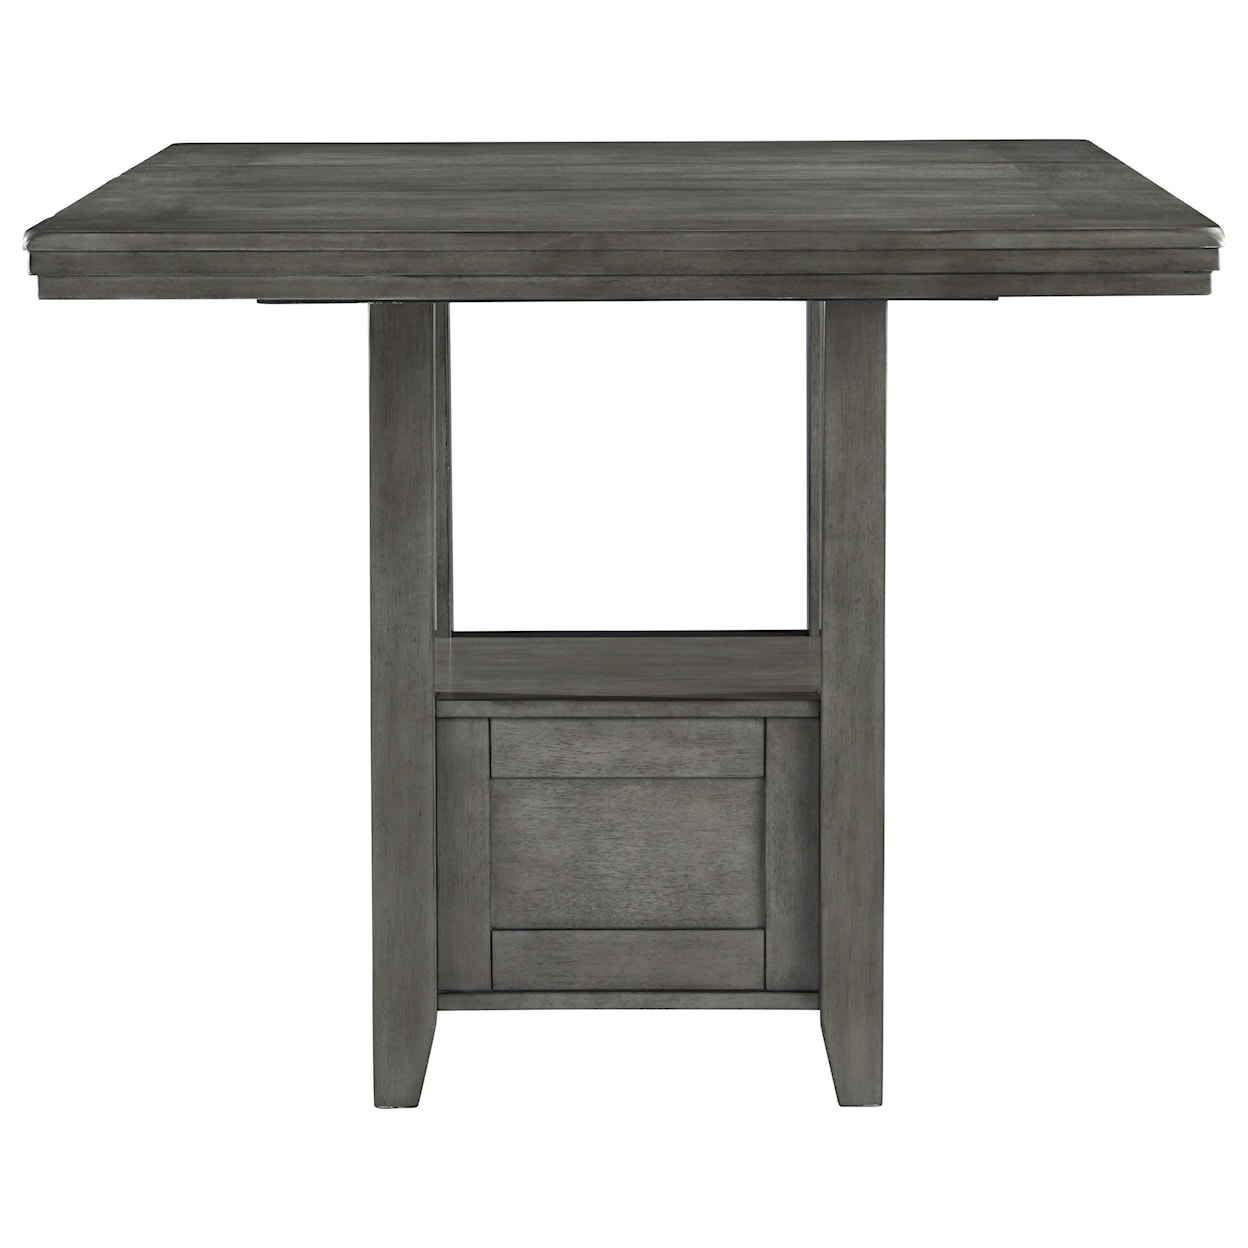 Signature Design by Ashley Hallanden - duplicate Counter Height Dining Table